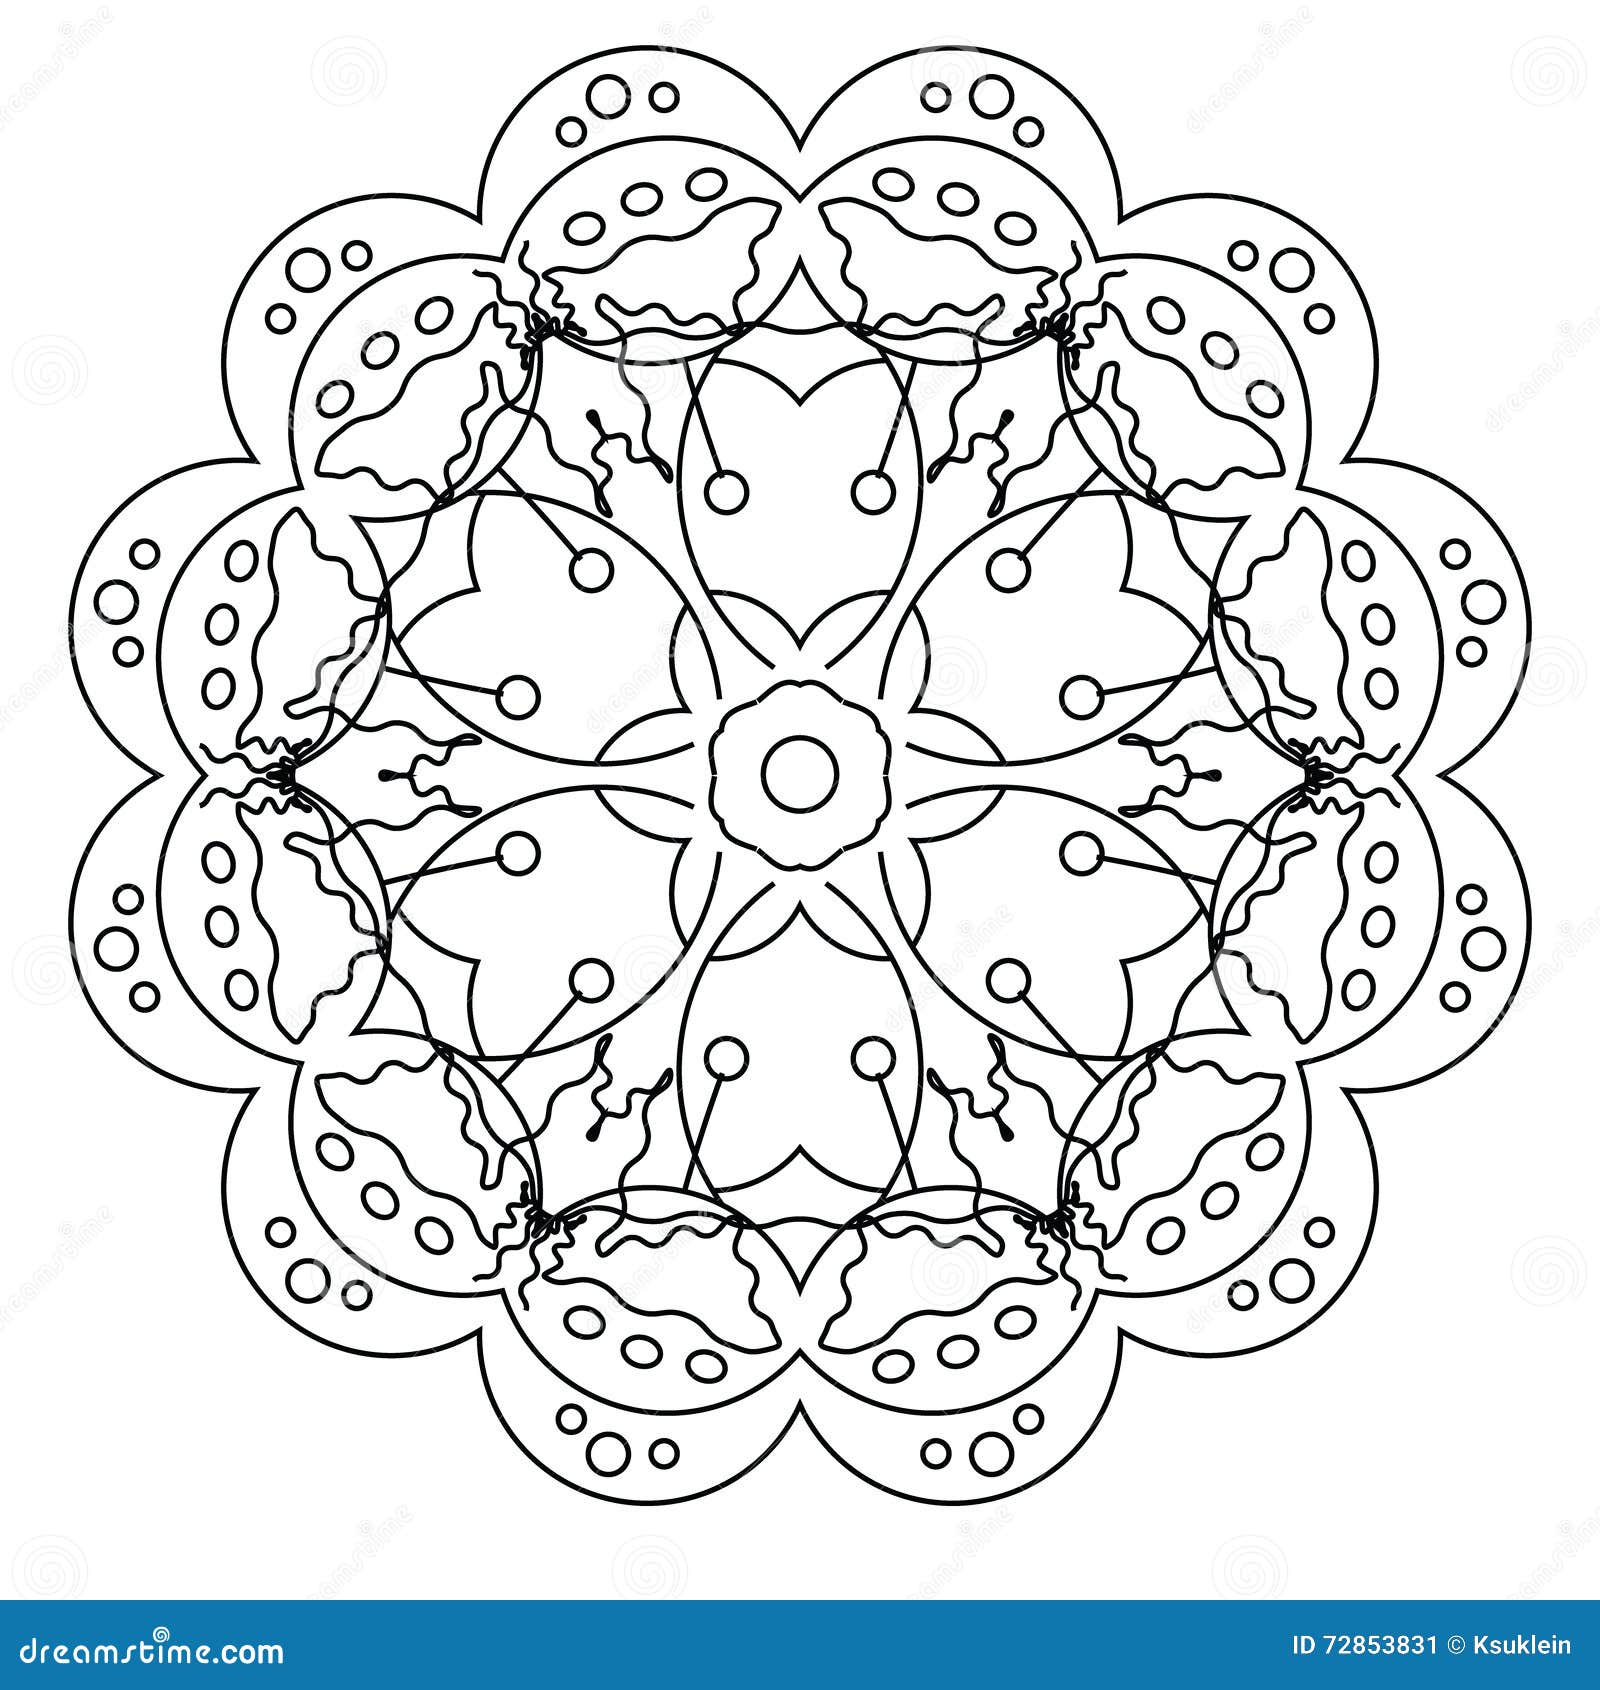 Relaxing Coloring Page With Mandala For Kids And Adults